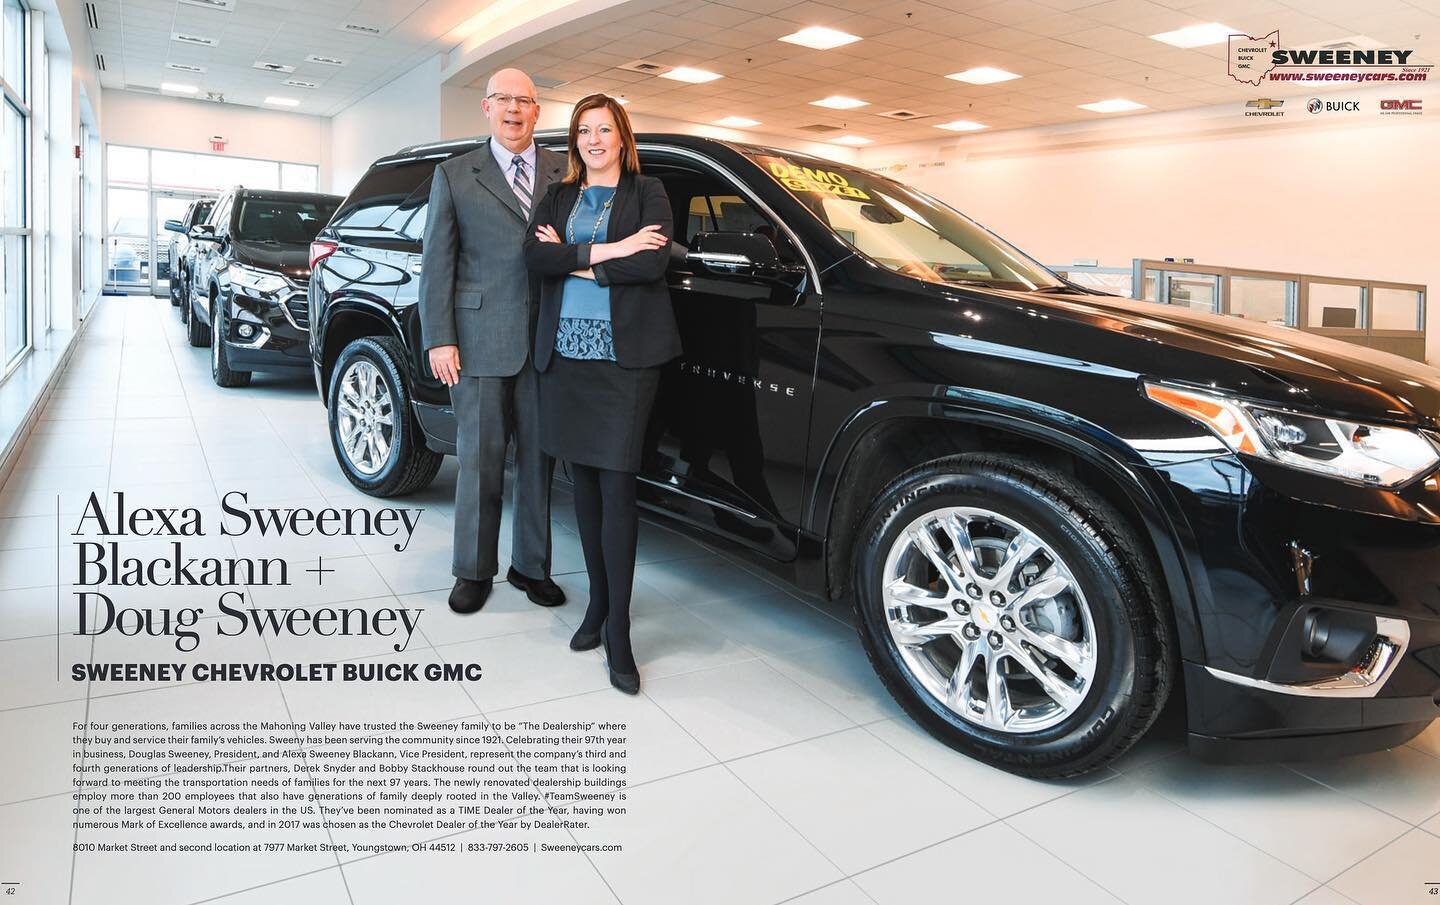 Congrats on 100 years @sweeneycars great to have you part of our ICONS publication! #iconsofyoungstown #teamsweeney #youngstownoh